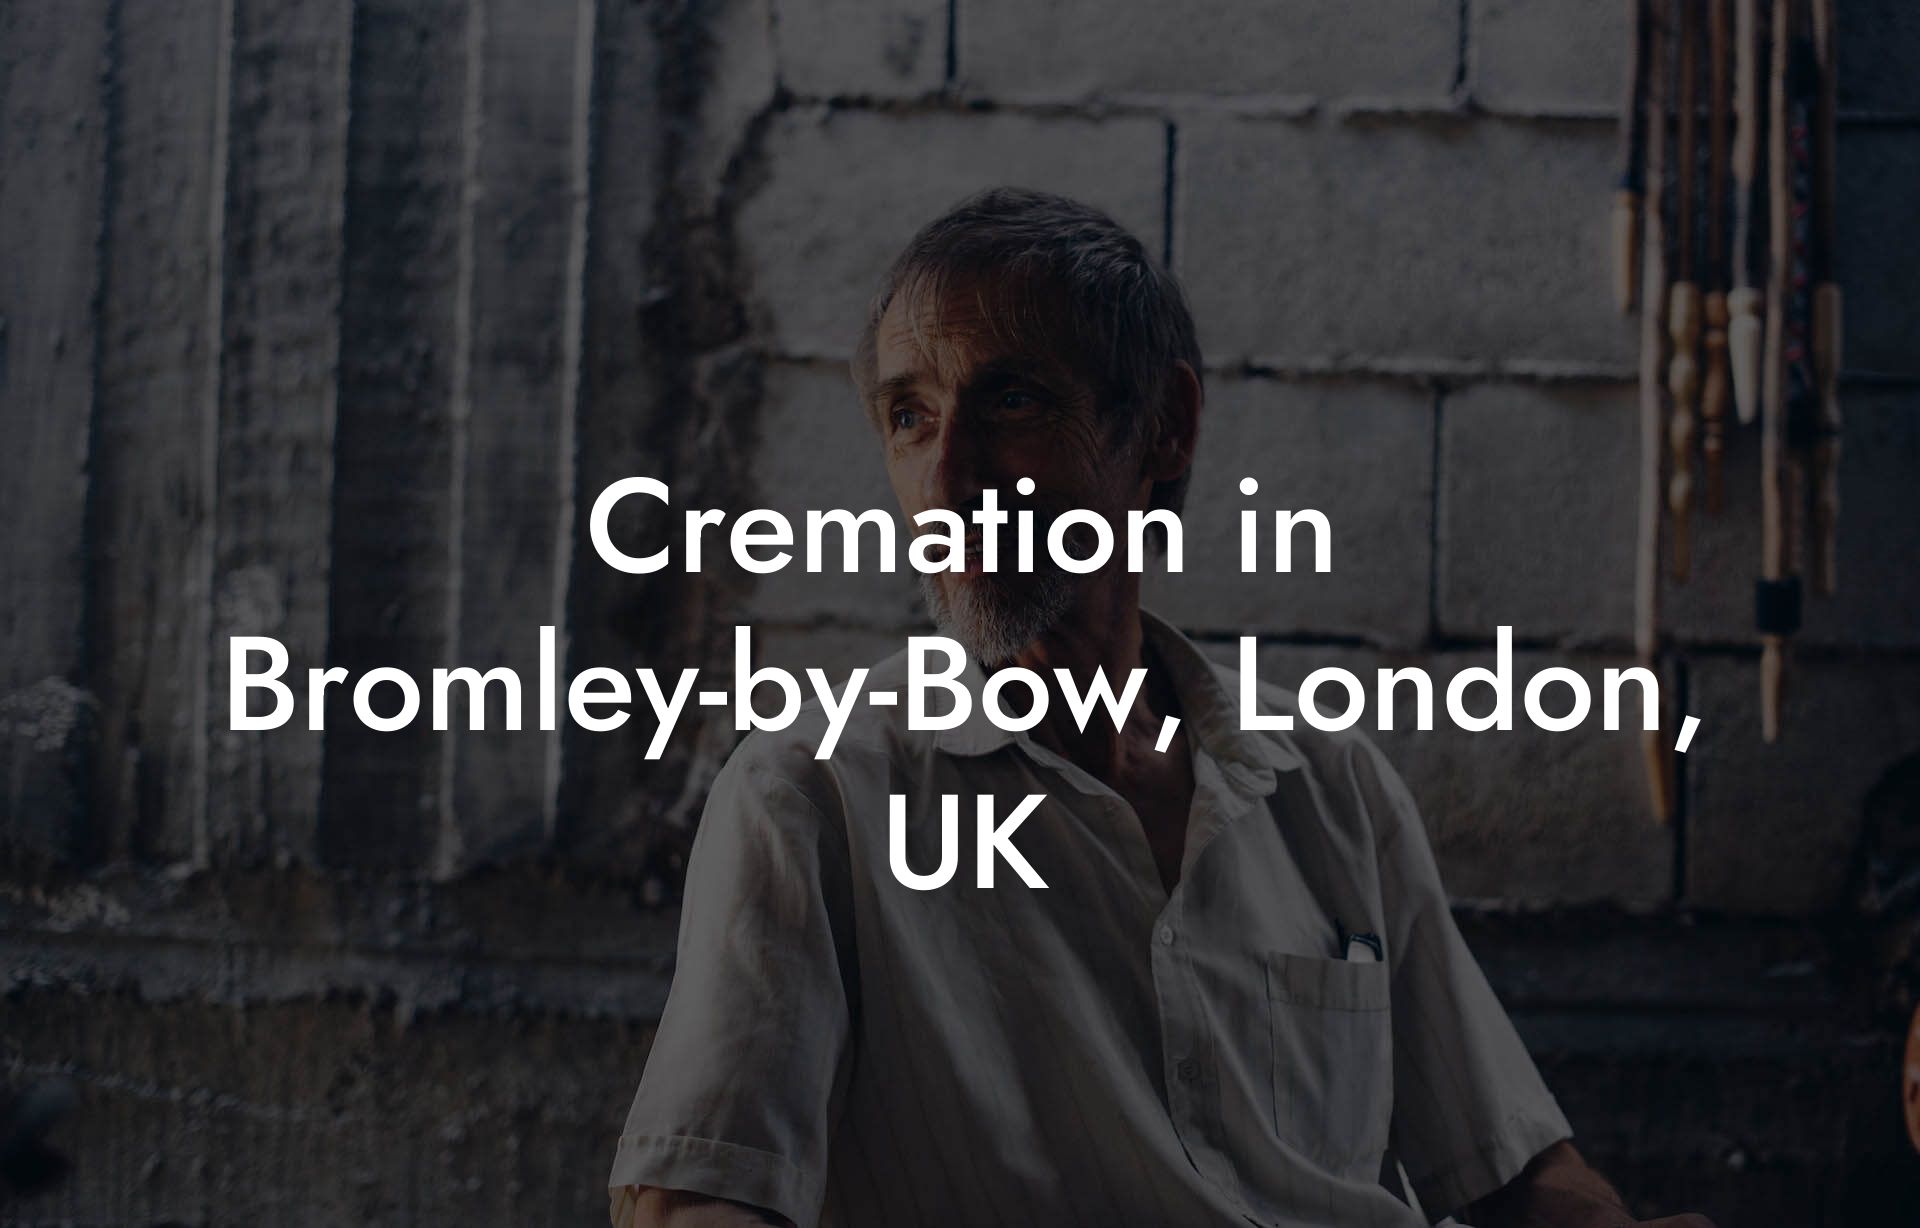 Cremation in Bromley-by-Bow, London, UK